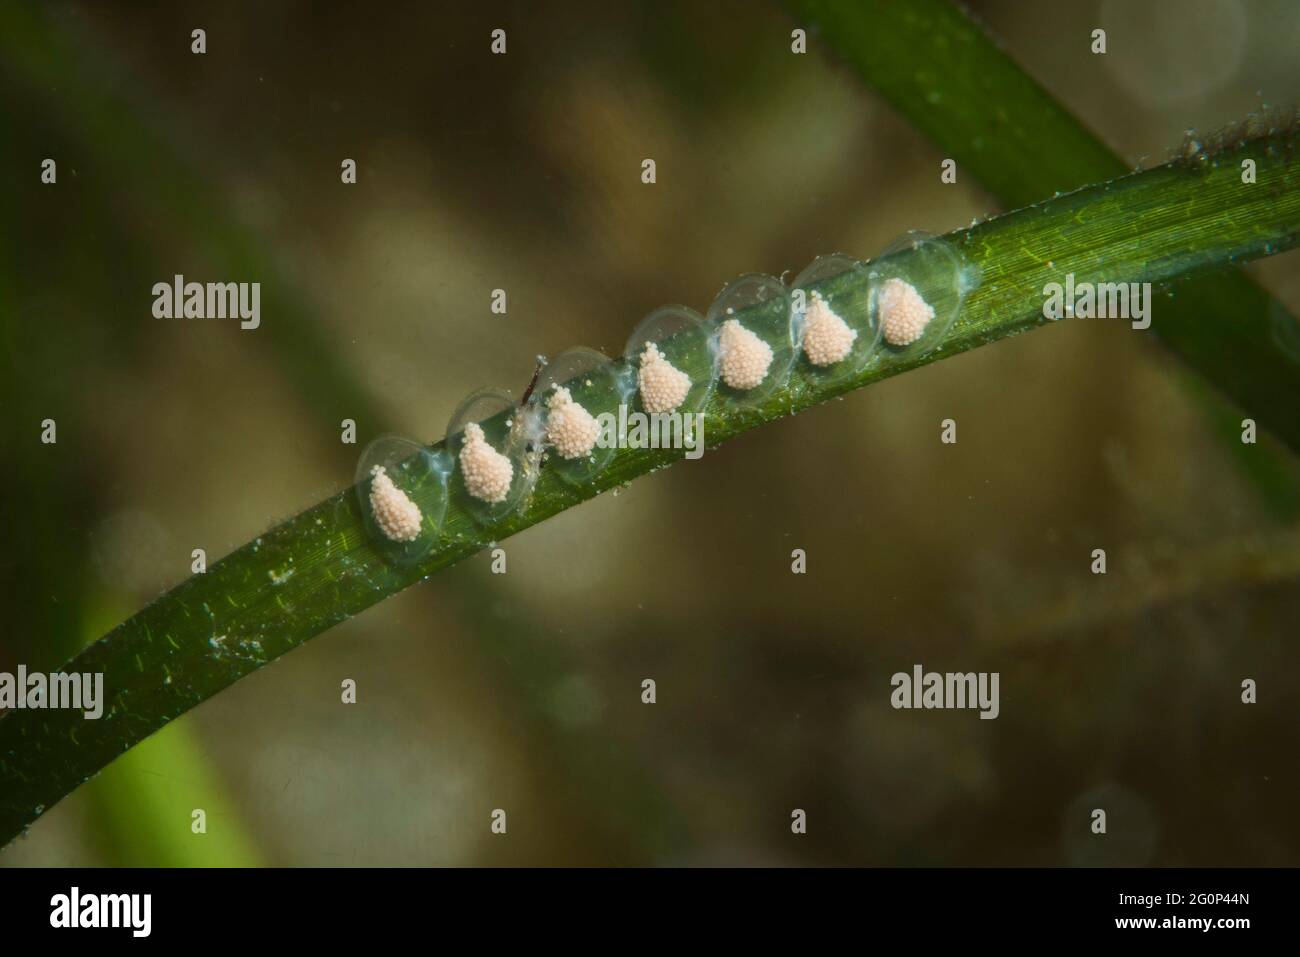 Netted Dog Whelk eggs underwater on seagrass Stock Photo